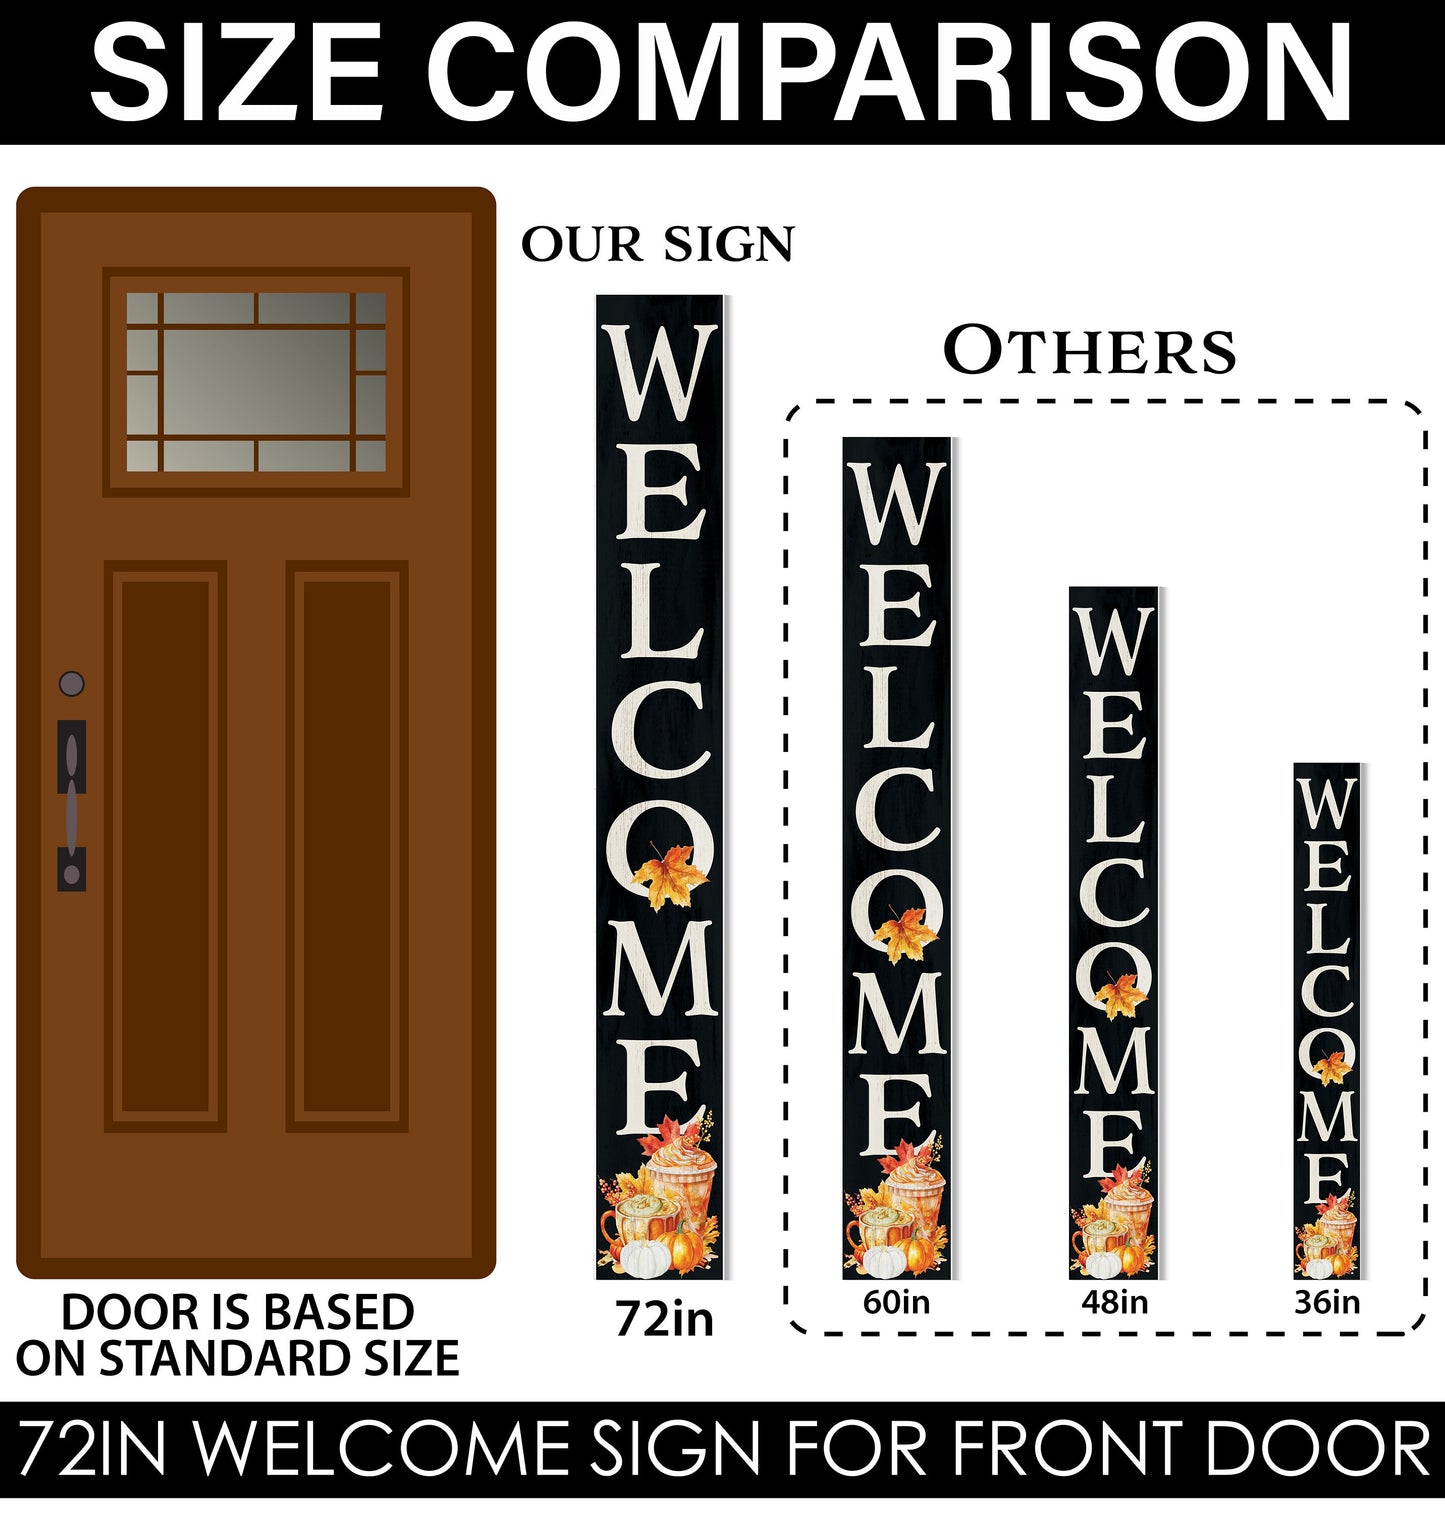 72in "Welcome" Fall Porch Sign with Fall Drink Design - Tall Porch Board Decor for Front Door during Autumn and Thanksgiving Celebrations